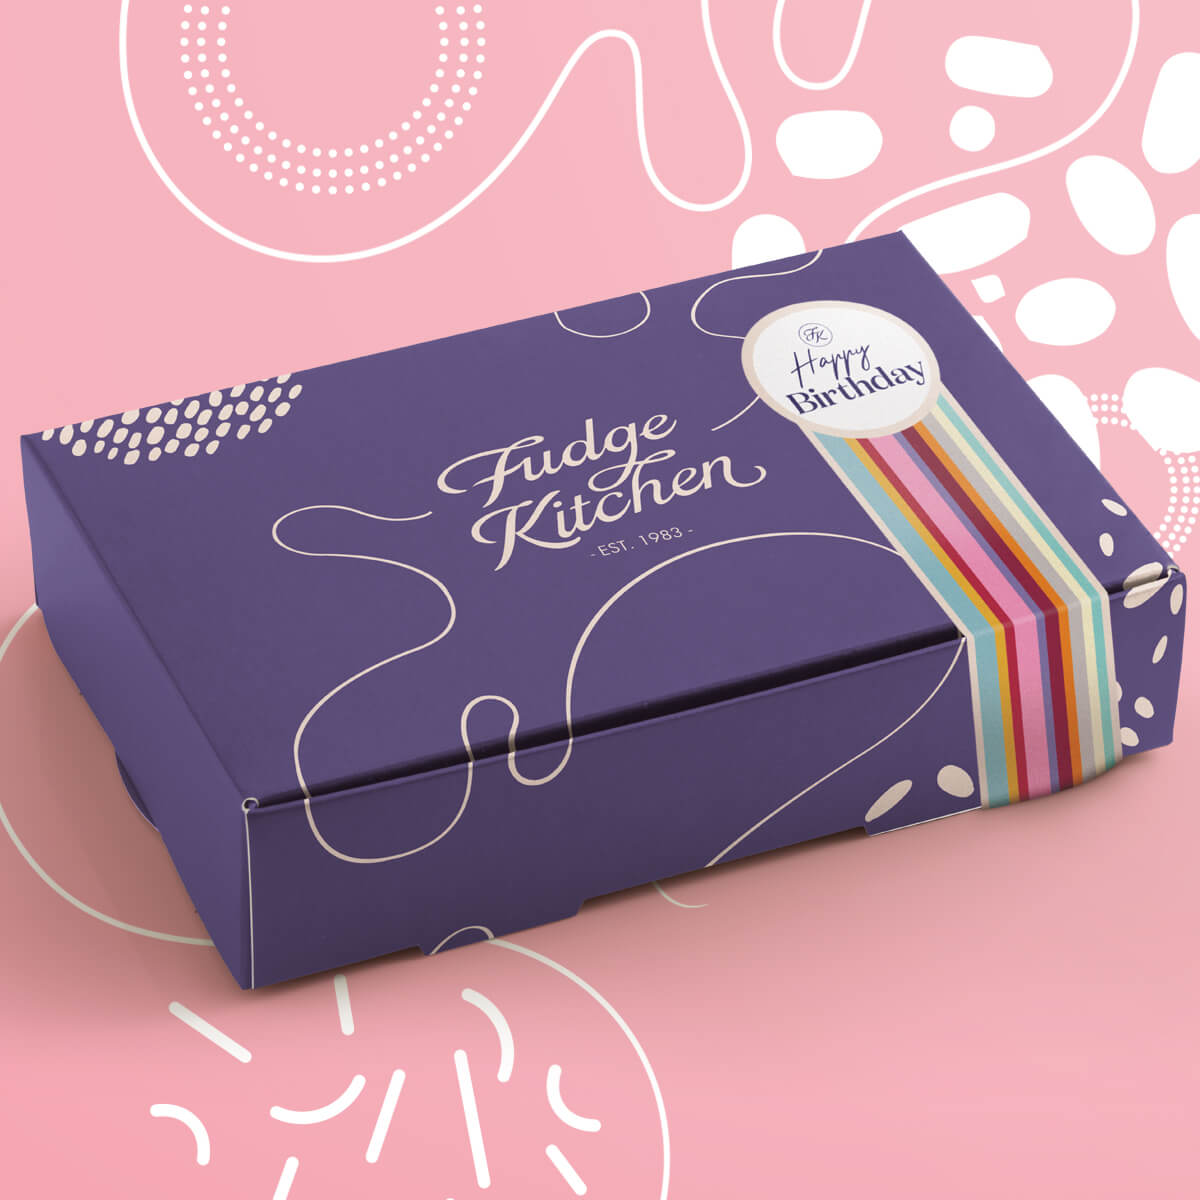 Butter fudge gift box with Birthday band